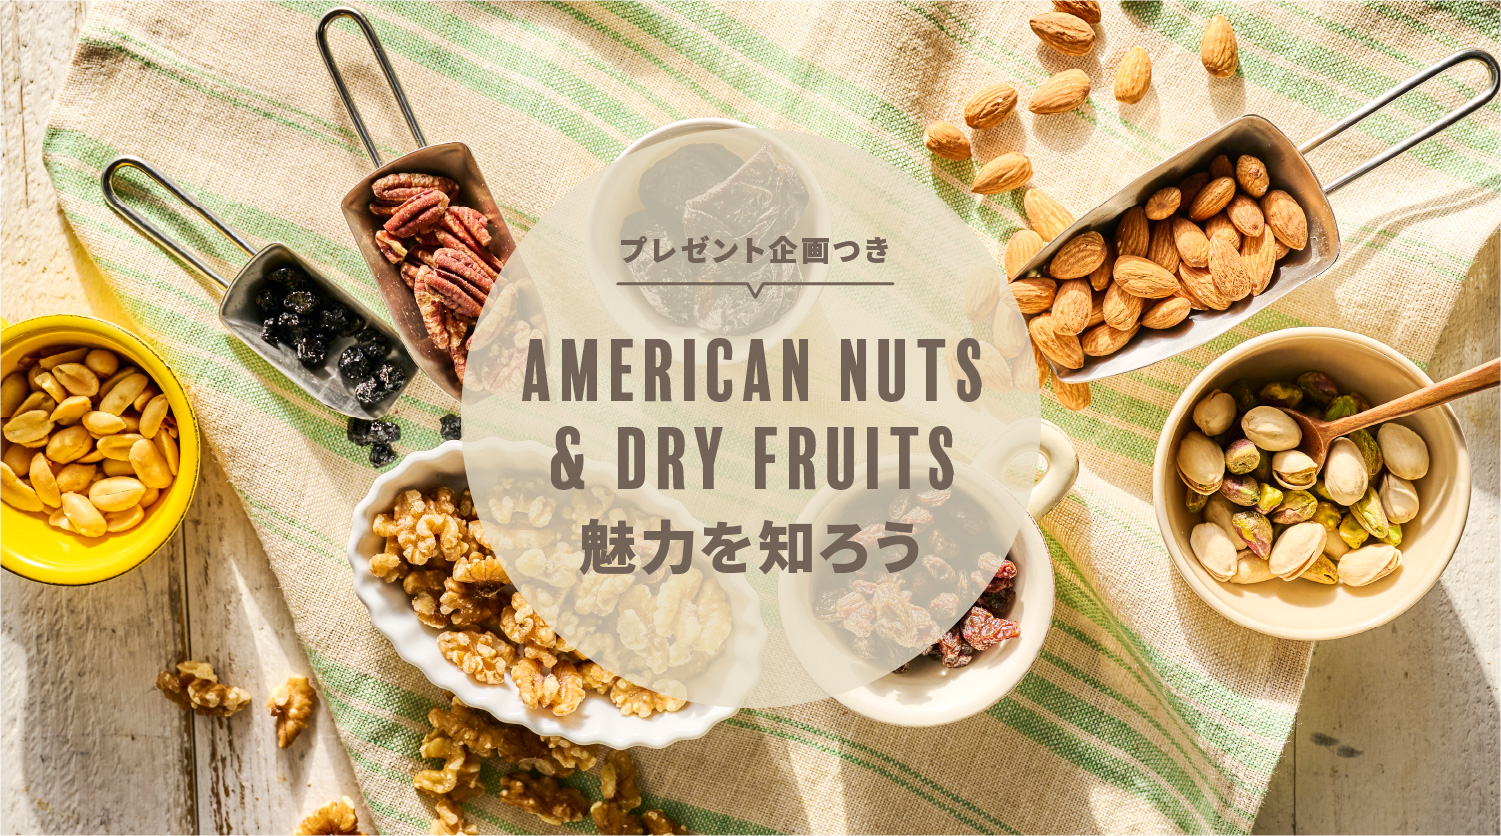 AMERICAN NUTS & DRY FRUITS 魅力を知ろう